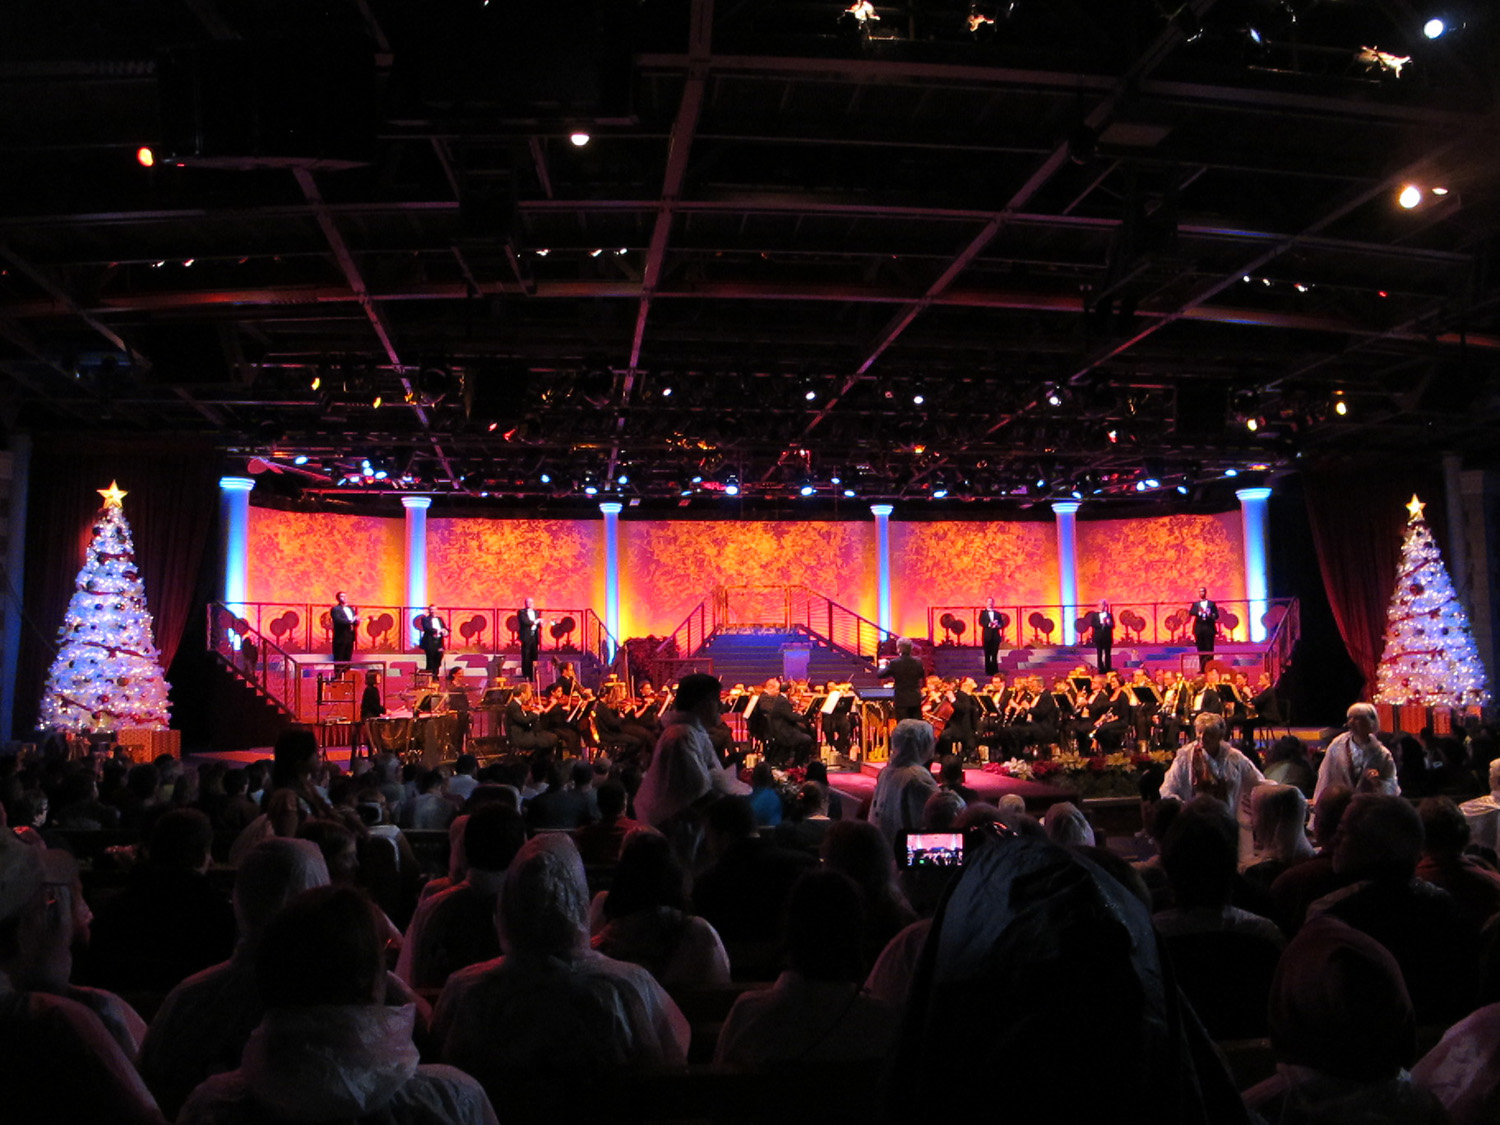 Epcot - Candlelight Processional